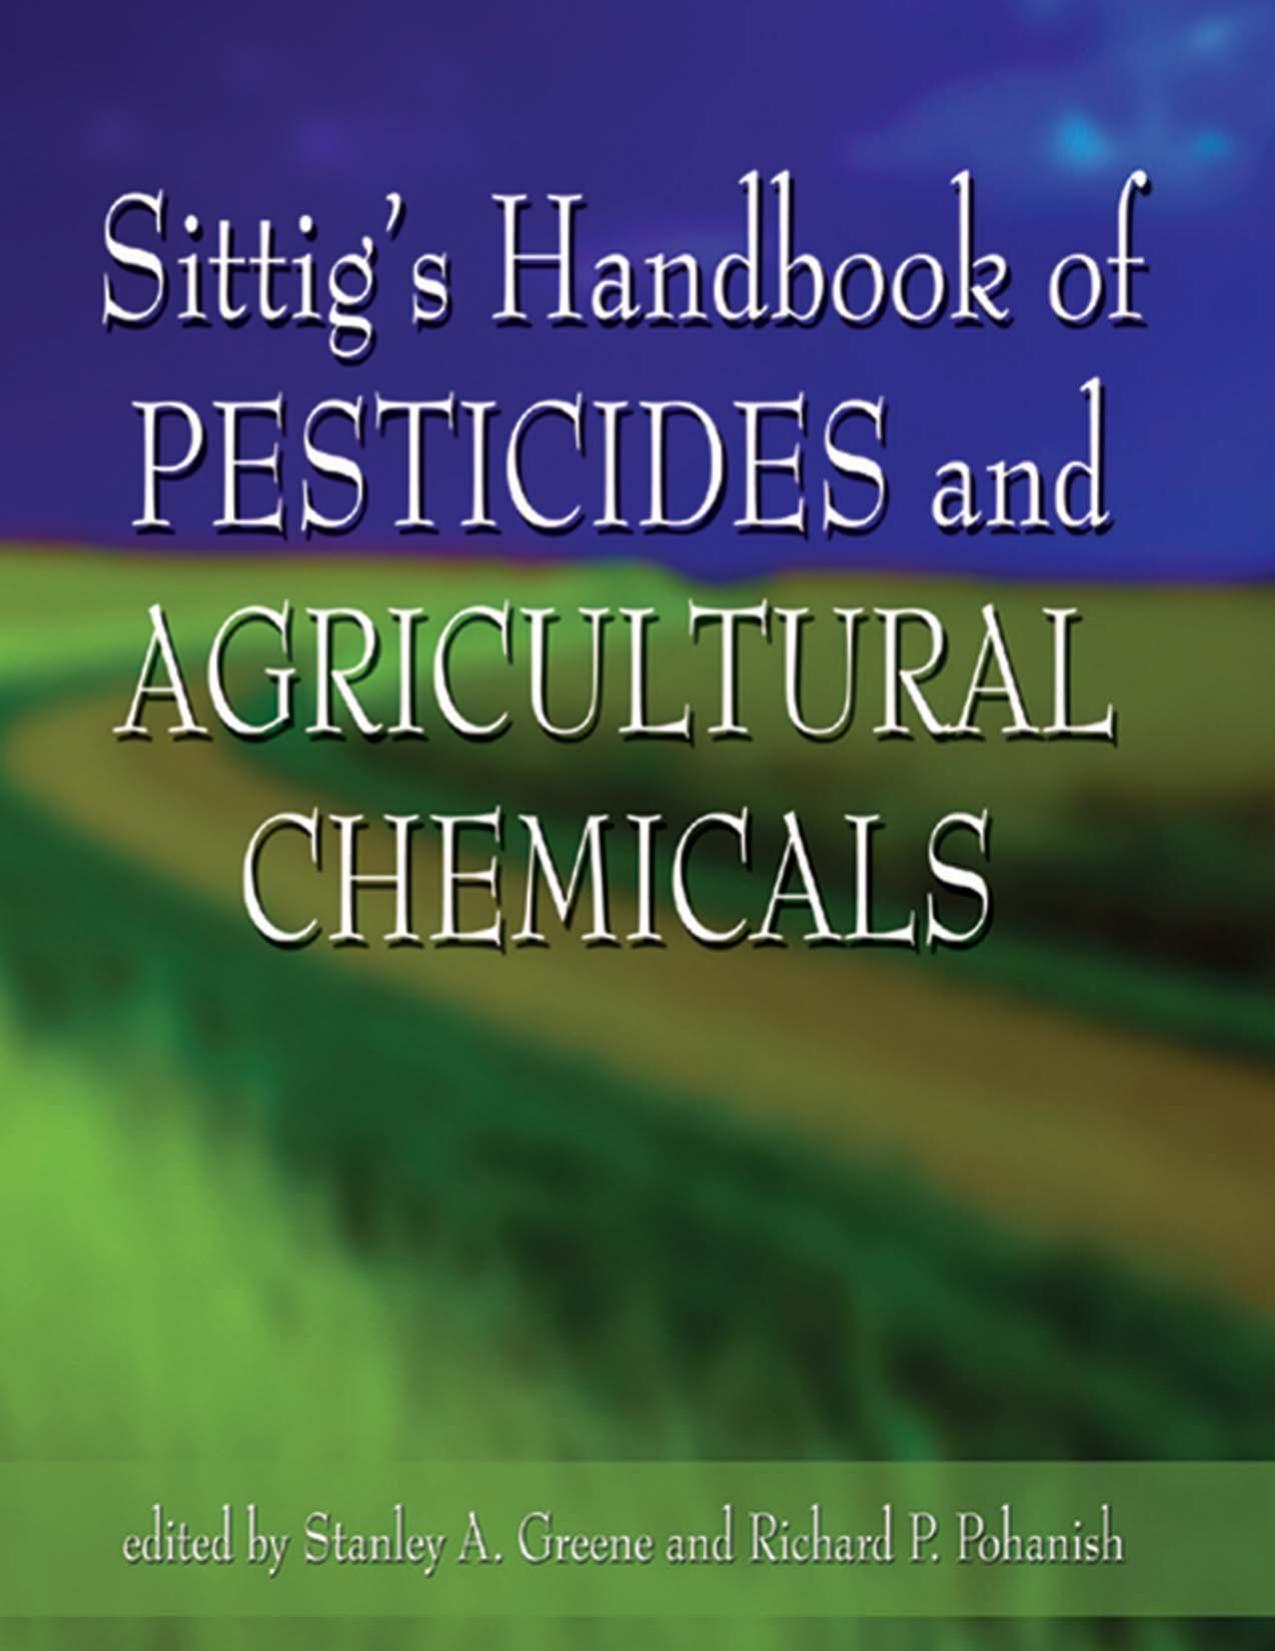 Sittig's Handbook of Pesticides and Agricultural Chemicals 2005